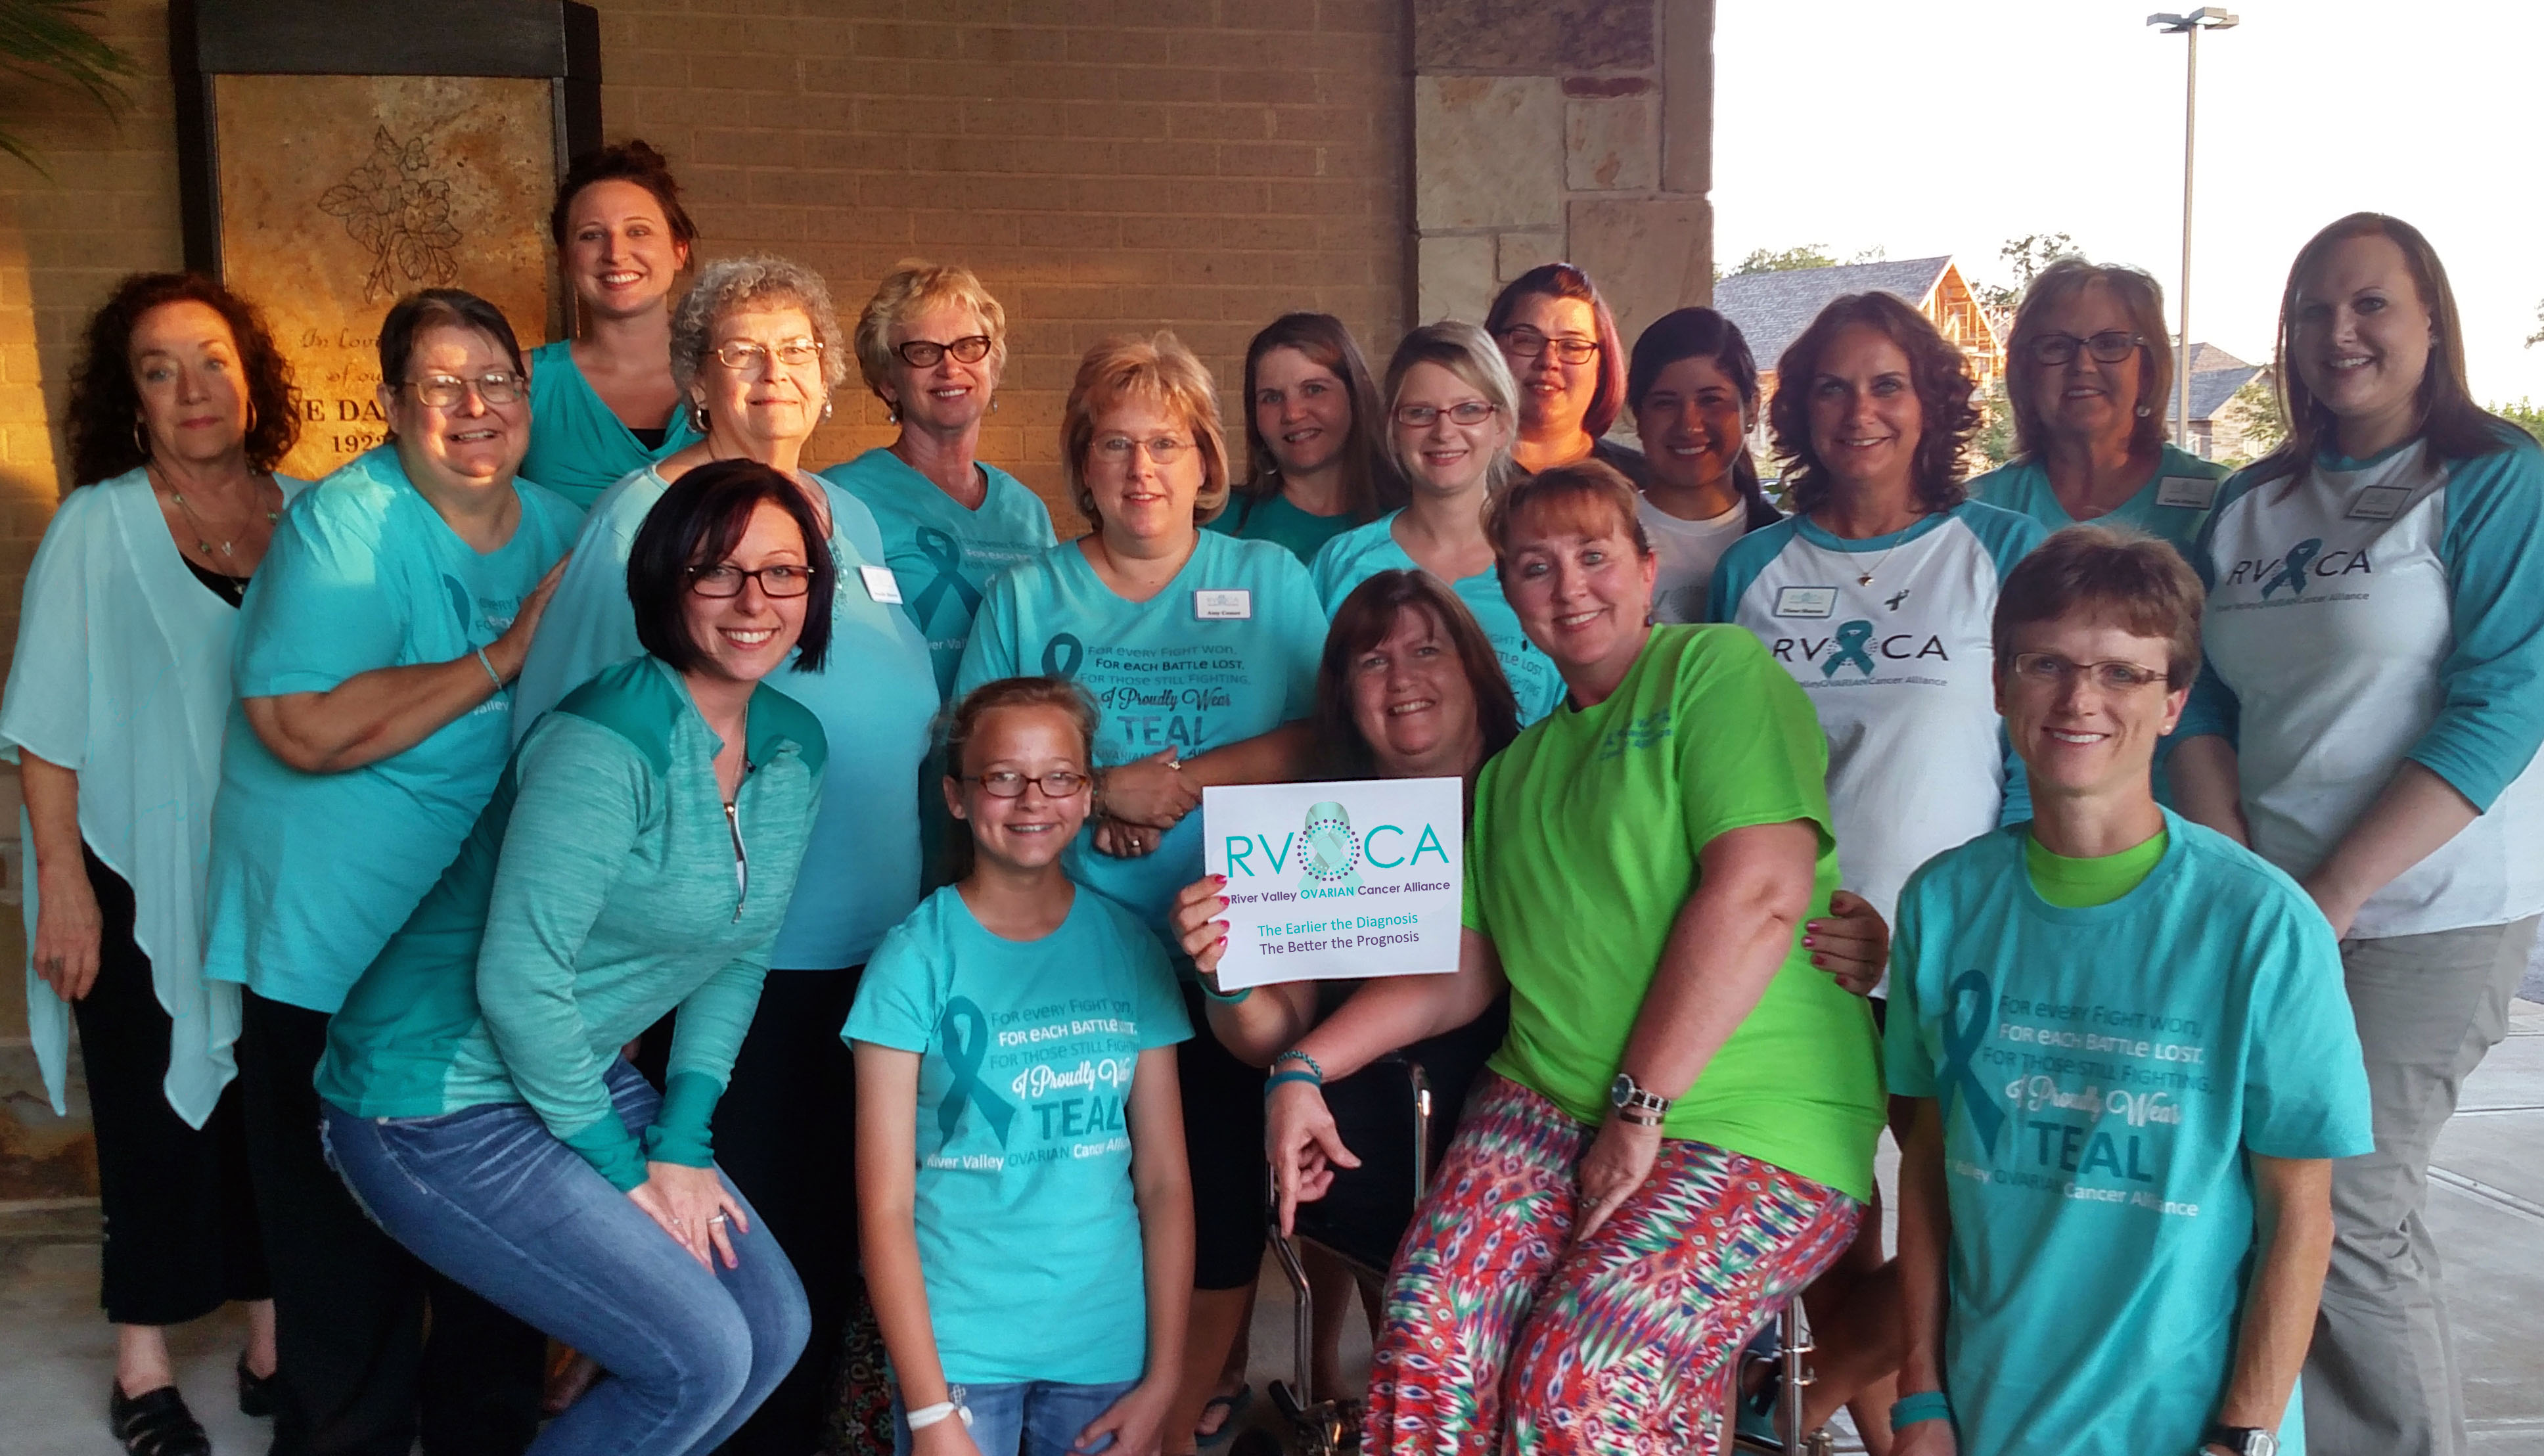 River Valley Ovarian Cancer Alliance Fort Smith Arkansas The Earlier the Diagnosis the Better the Prognosis